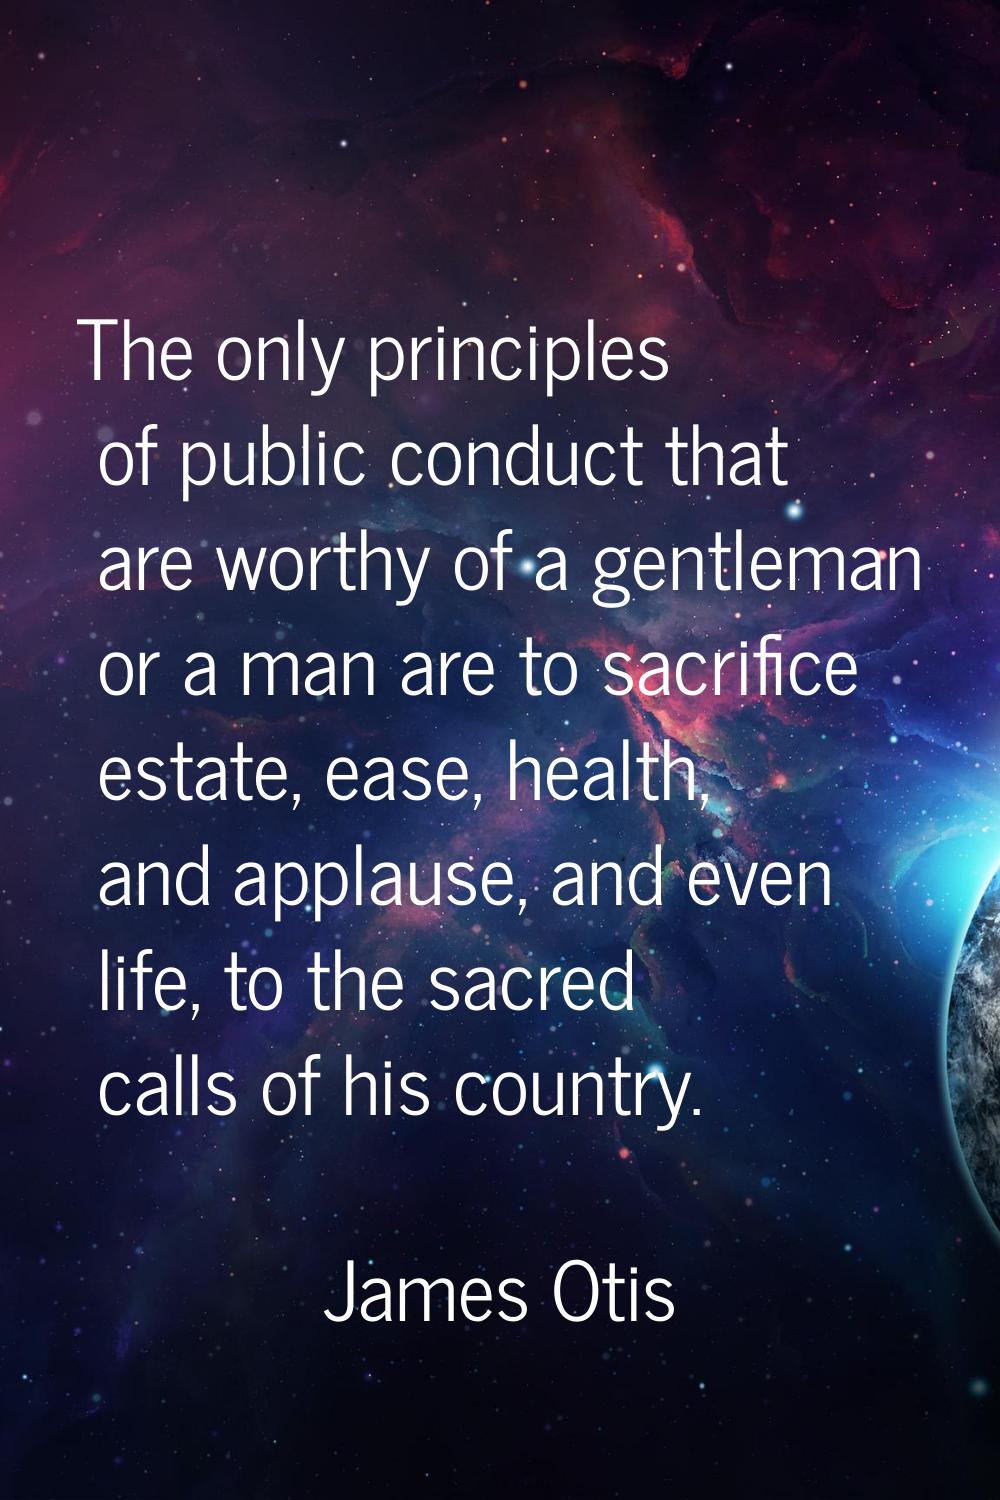 The only principles of public conduct that are worthy of a gentleman or a man are to sacrifice esta